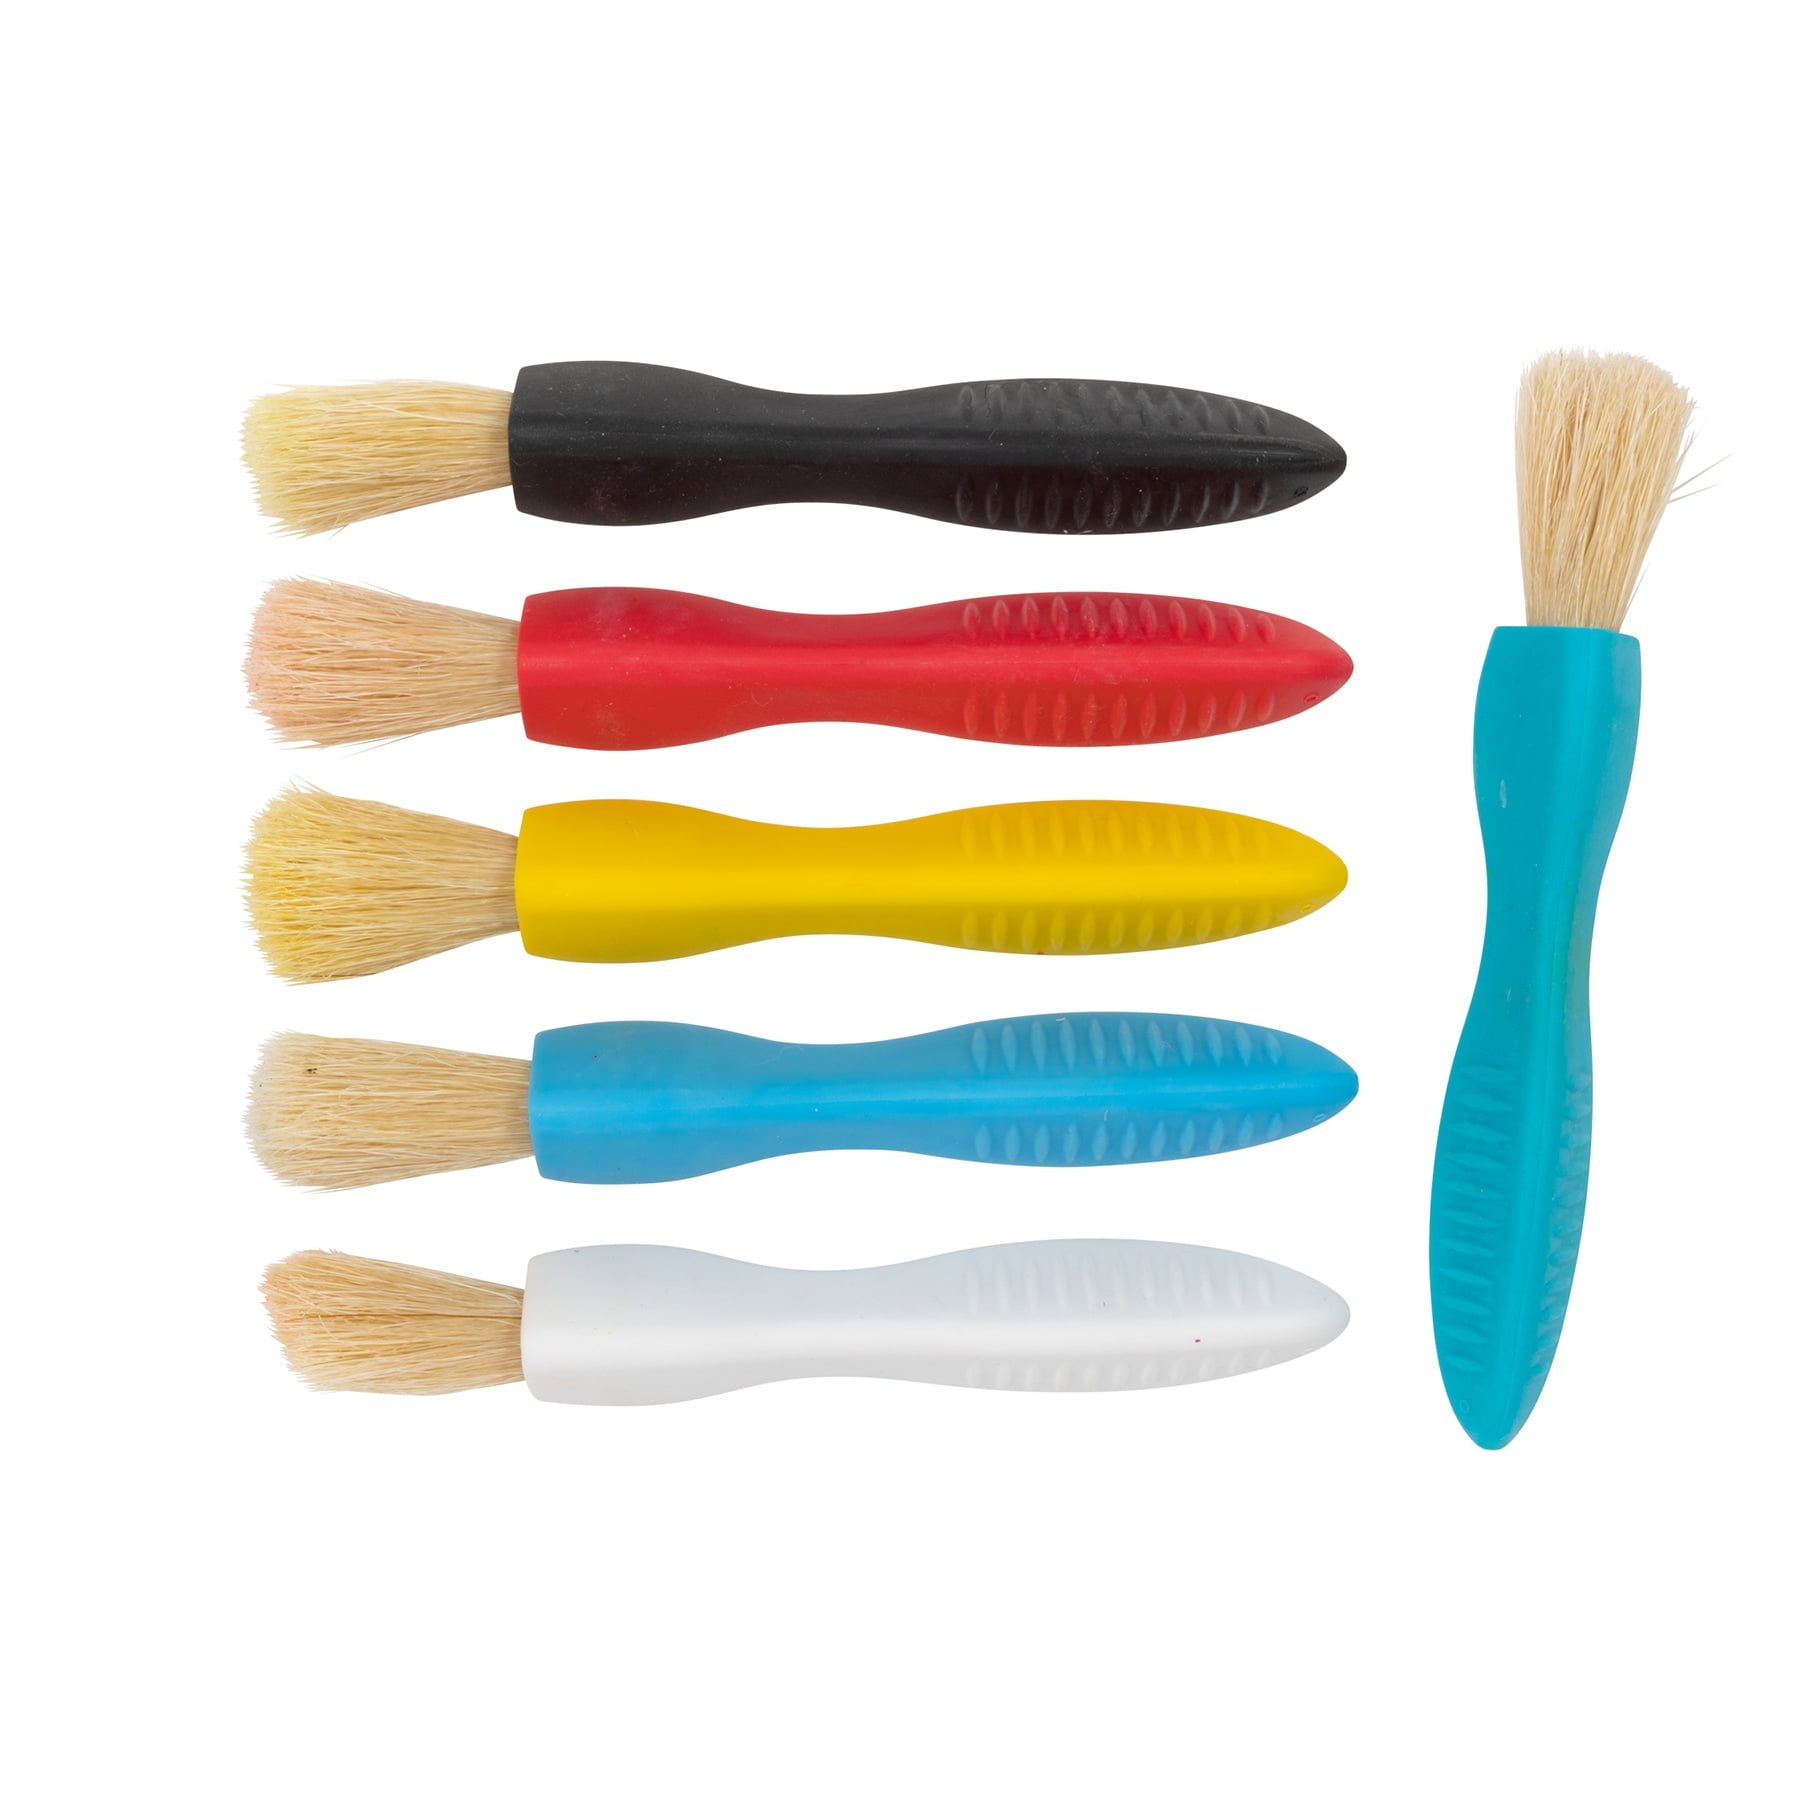 Yayiaclooher 3pcs Paint Brushes Wooden Artist Fan Brush Set for Oil Paint Brush Acrylic Paint